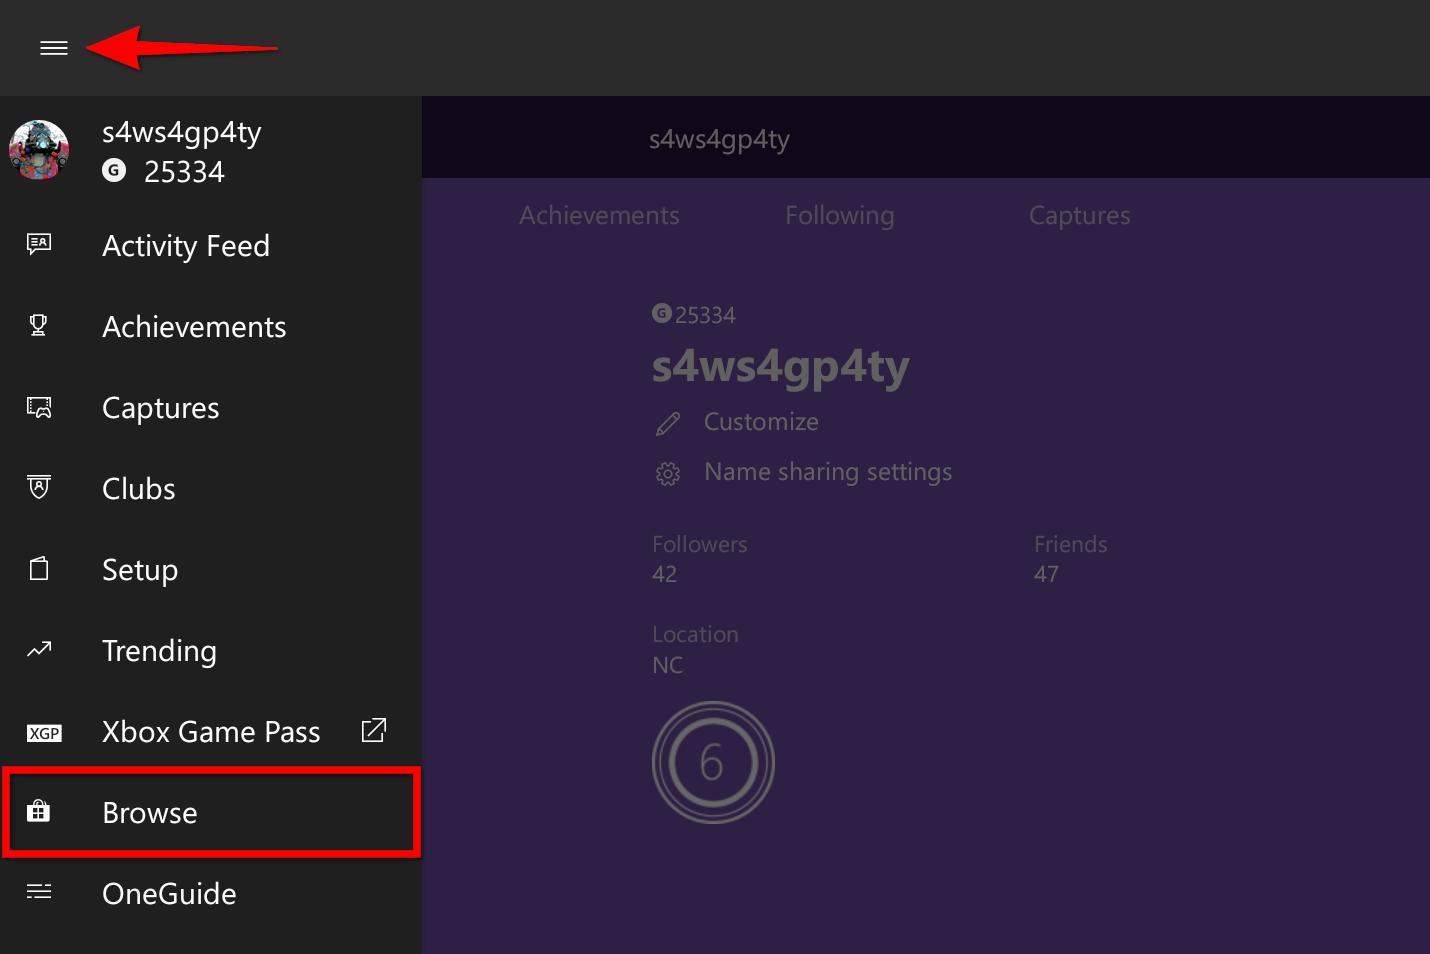 How To Redeem Xbox Game Pass Code On PC - Full Guide 